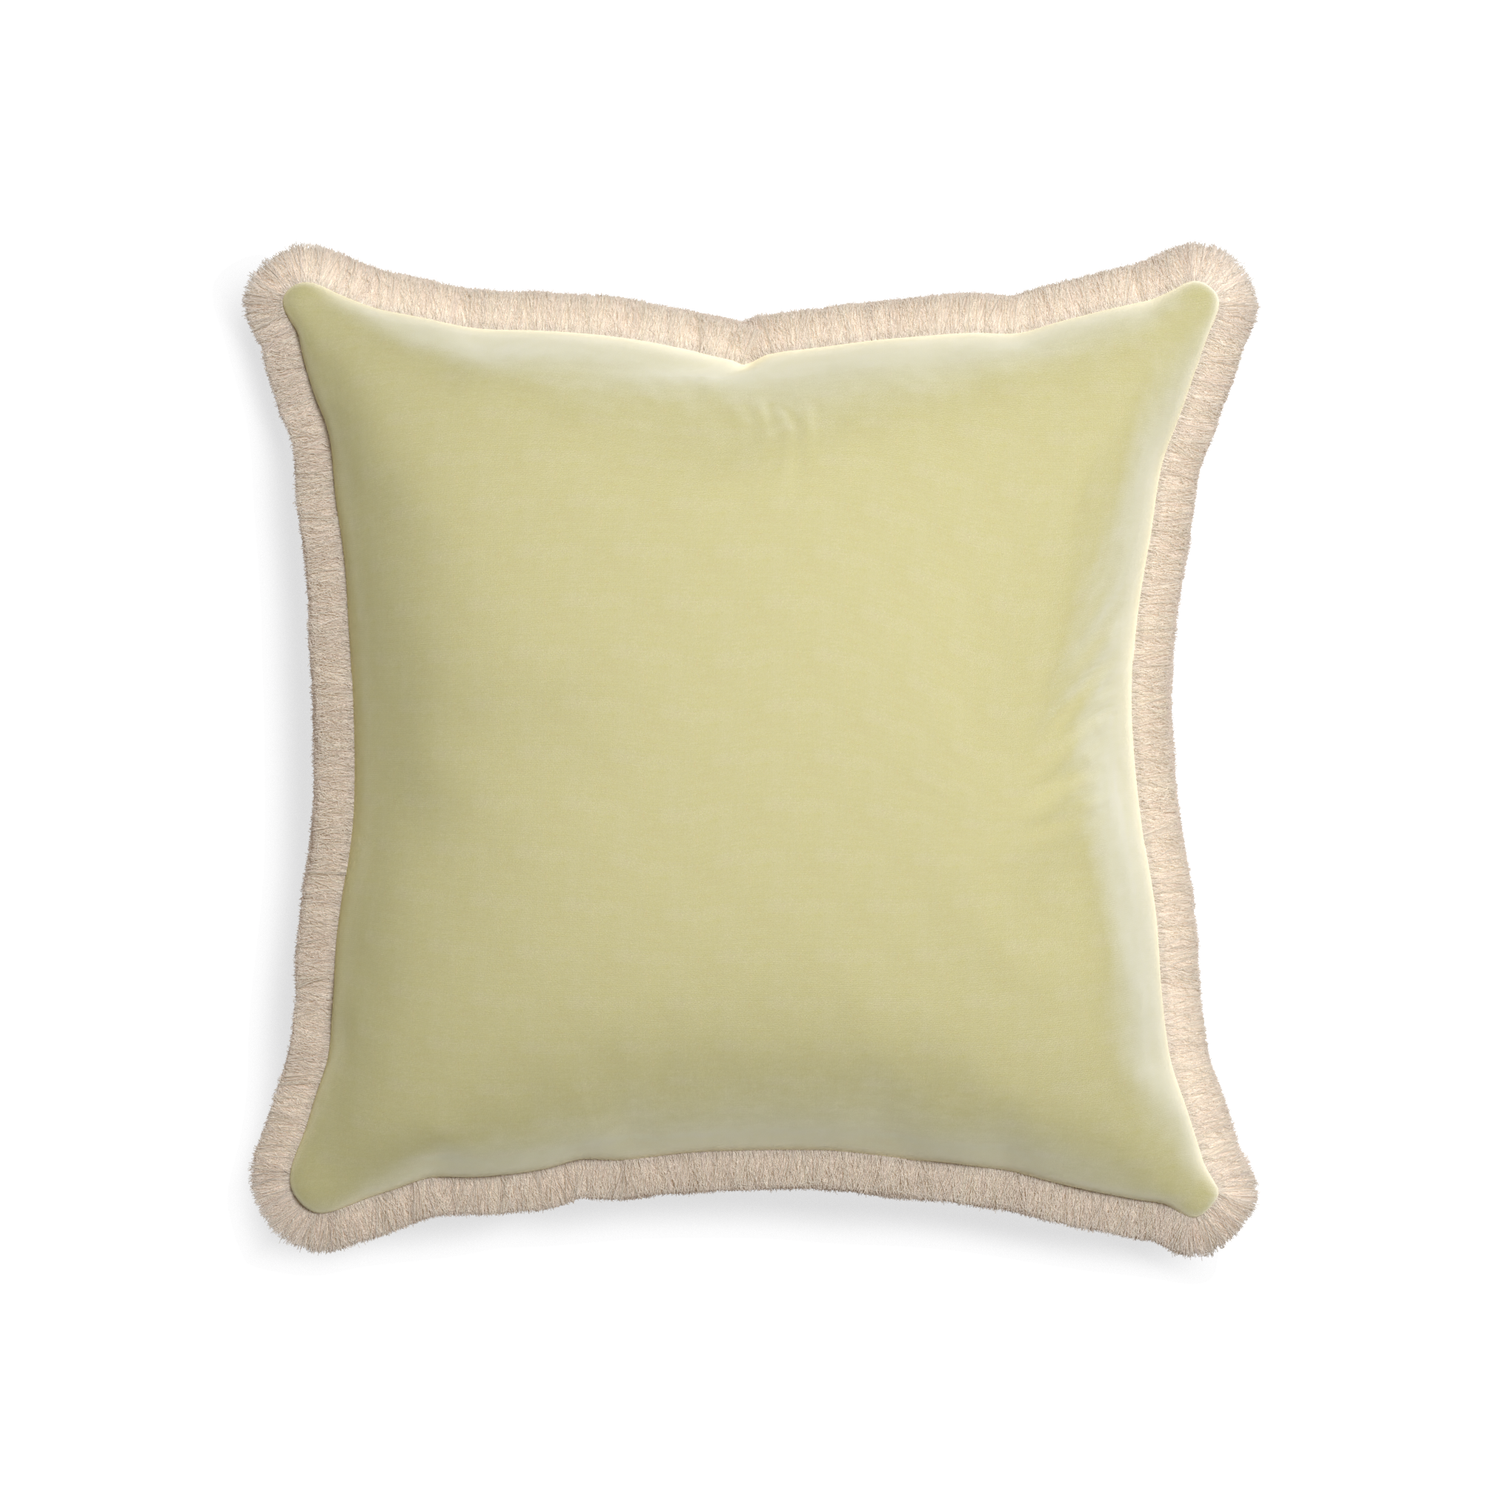 square light green pillow with cream fringe